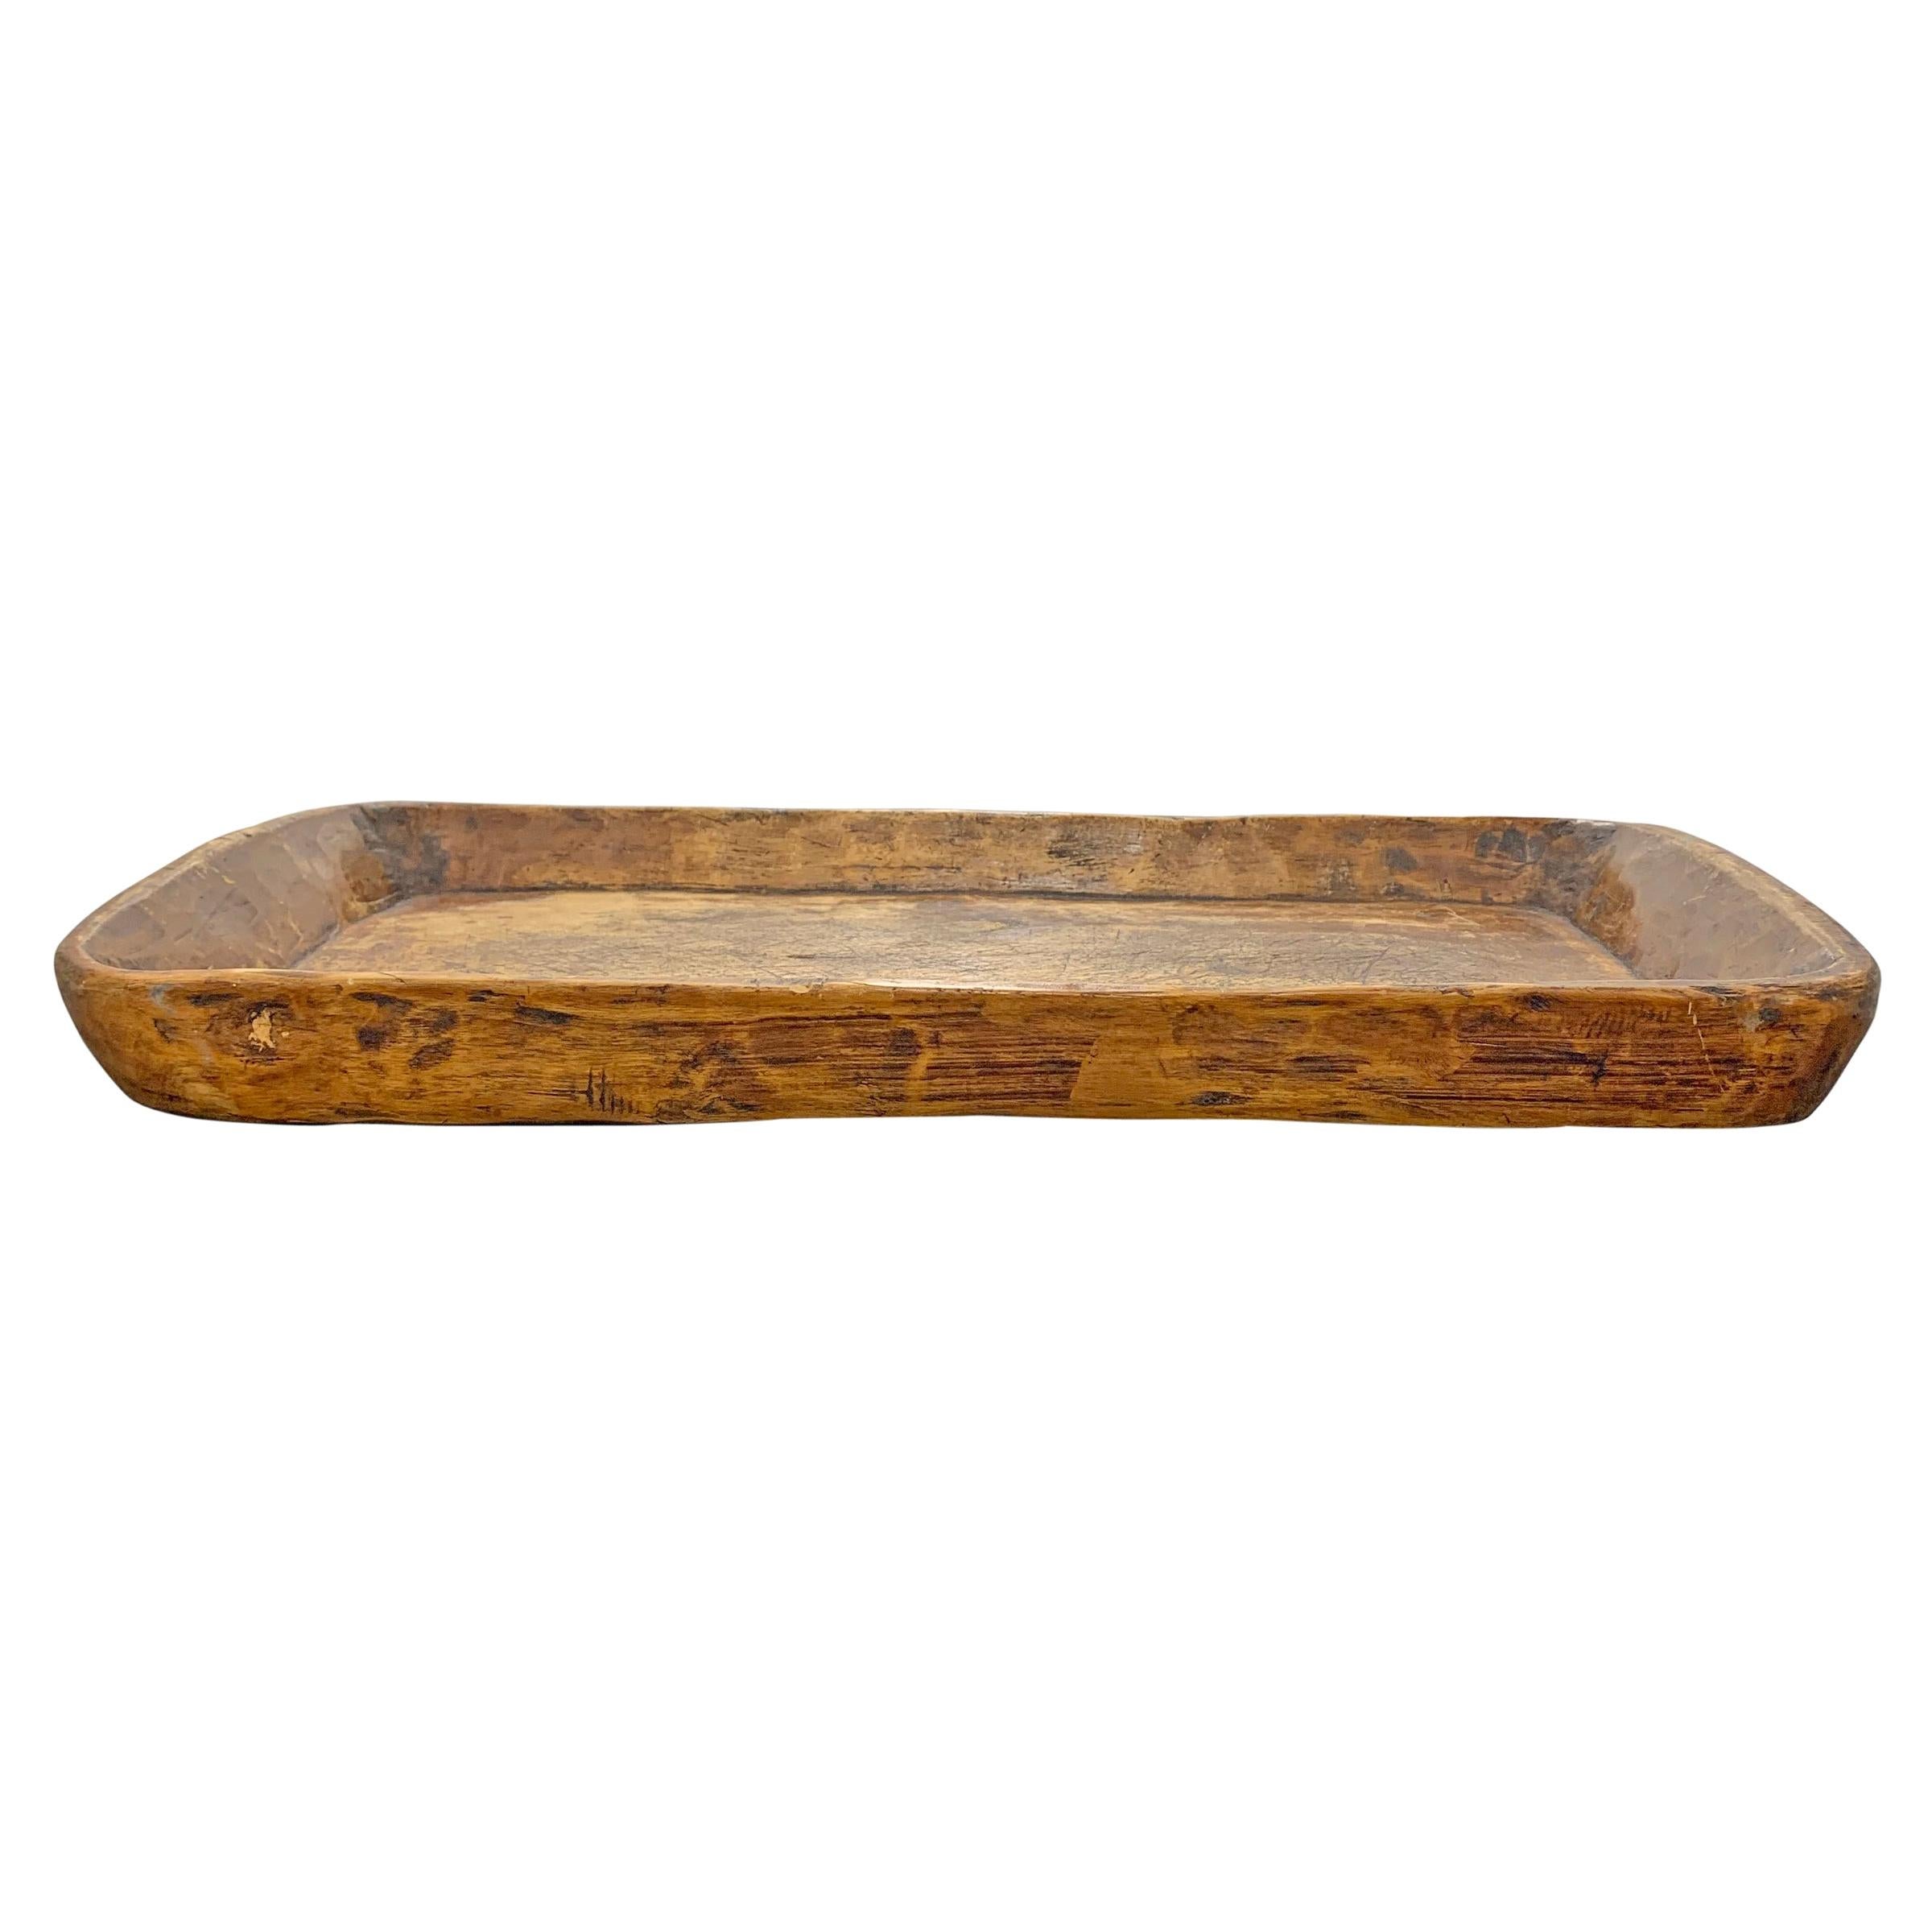 19th Century Carved Wood Tray